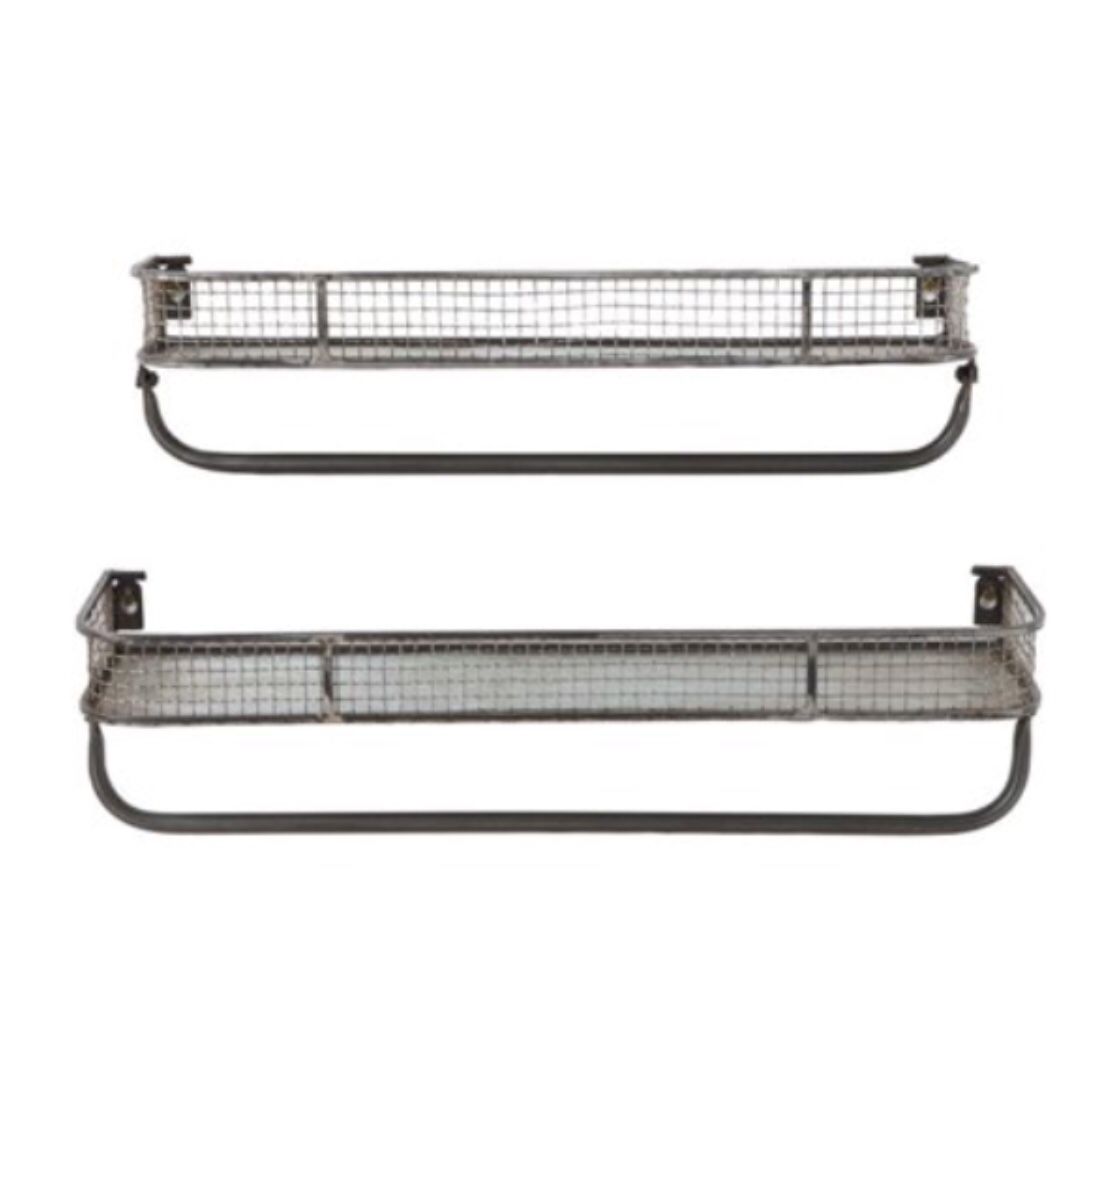 Metal Wall Shelves with Hanging Bar- Creative Co-op: Casual Country